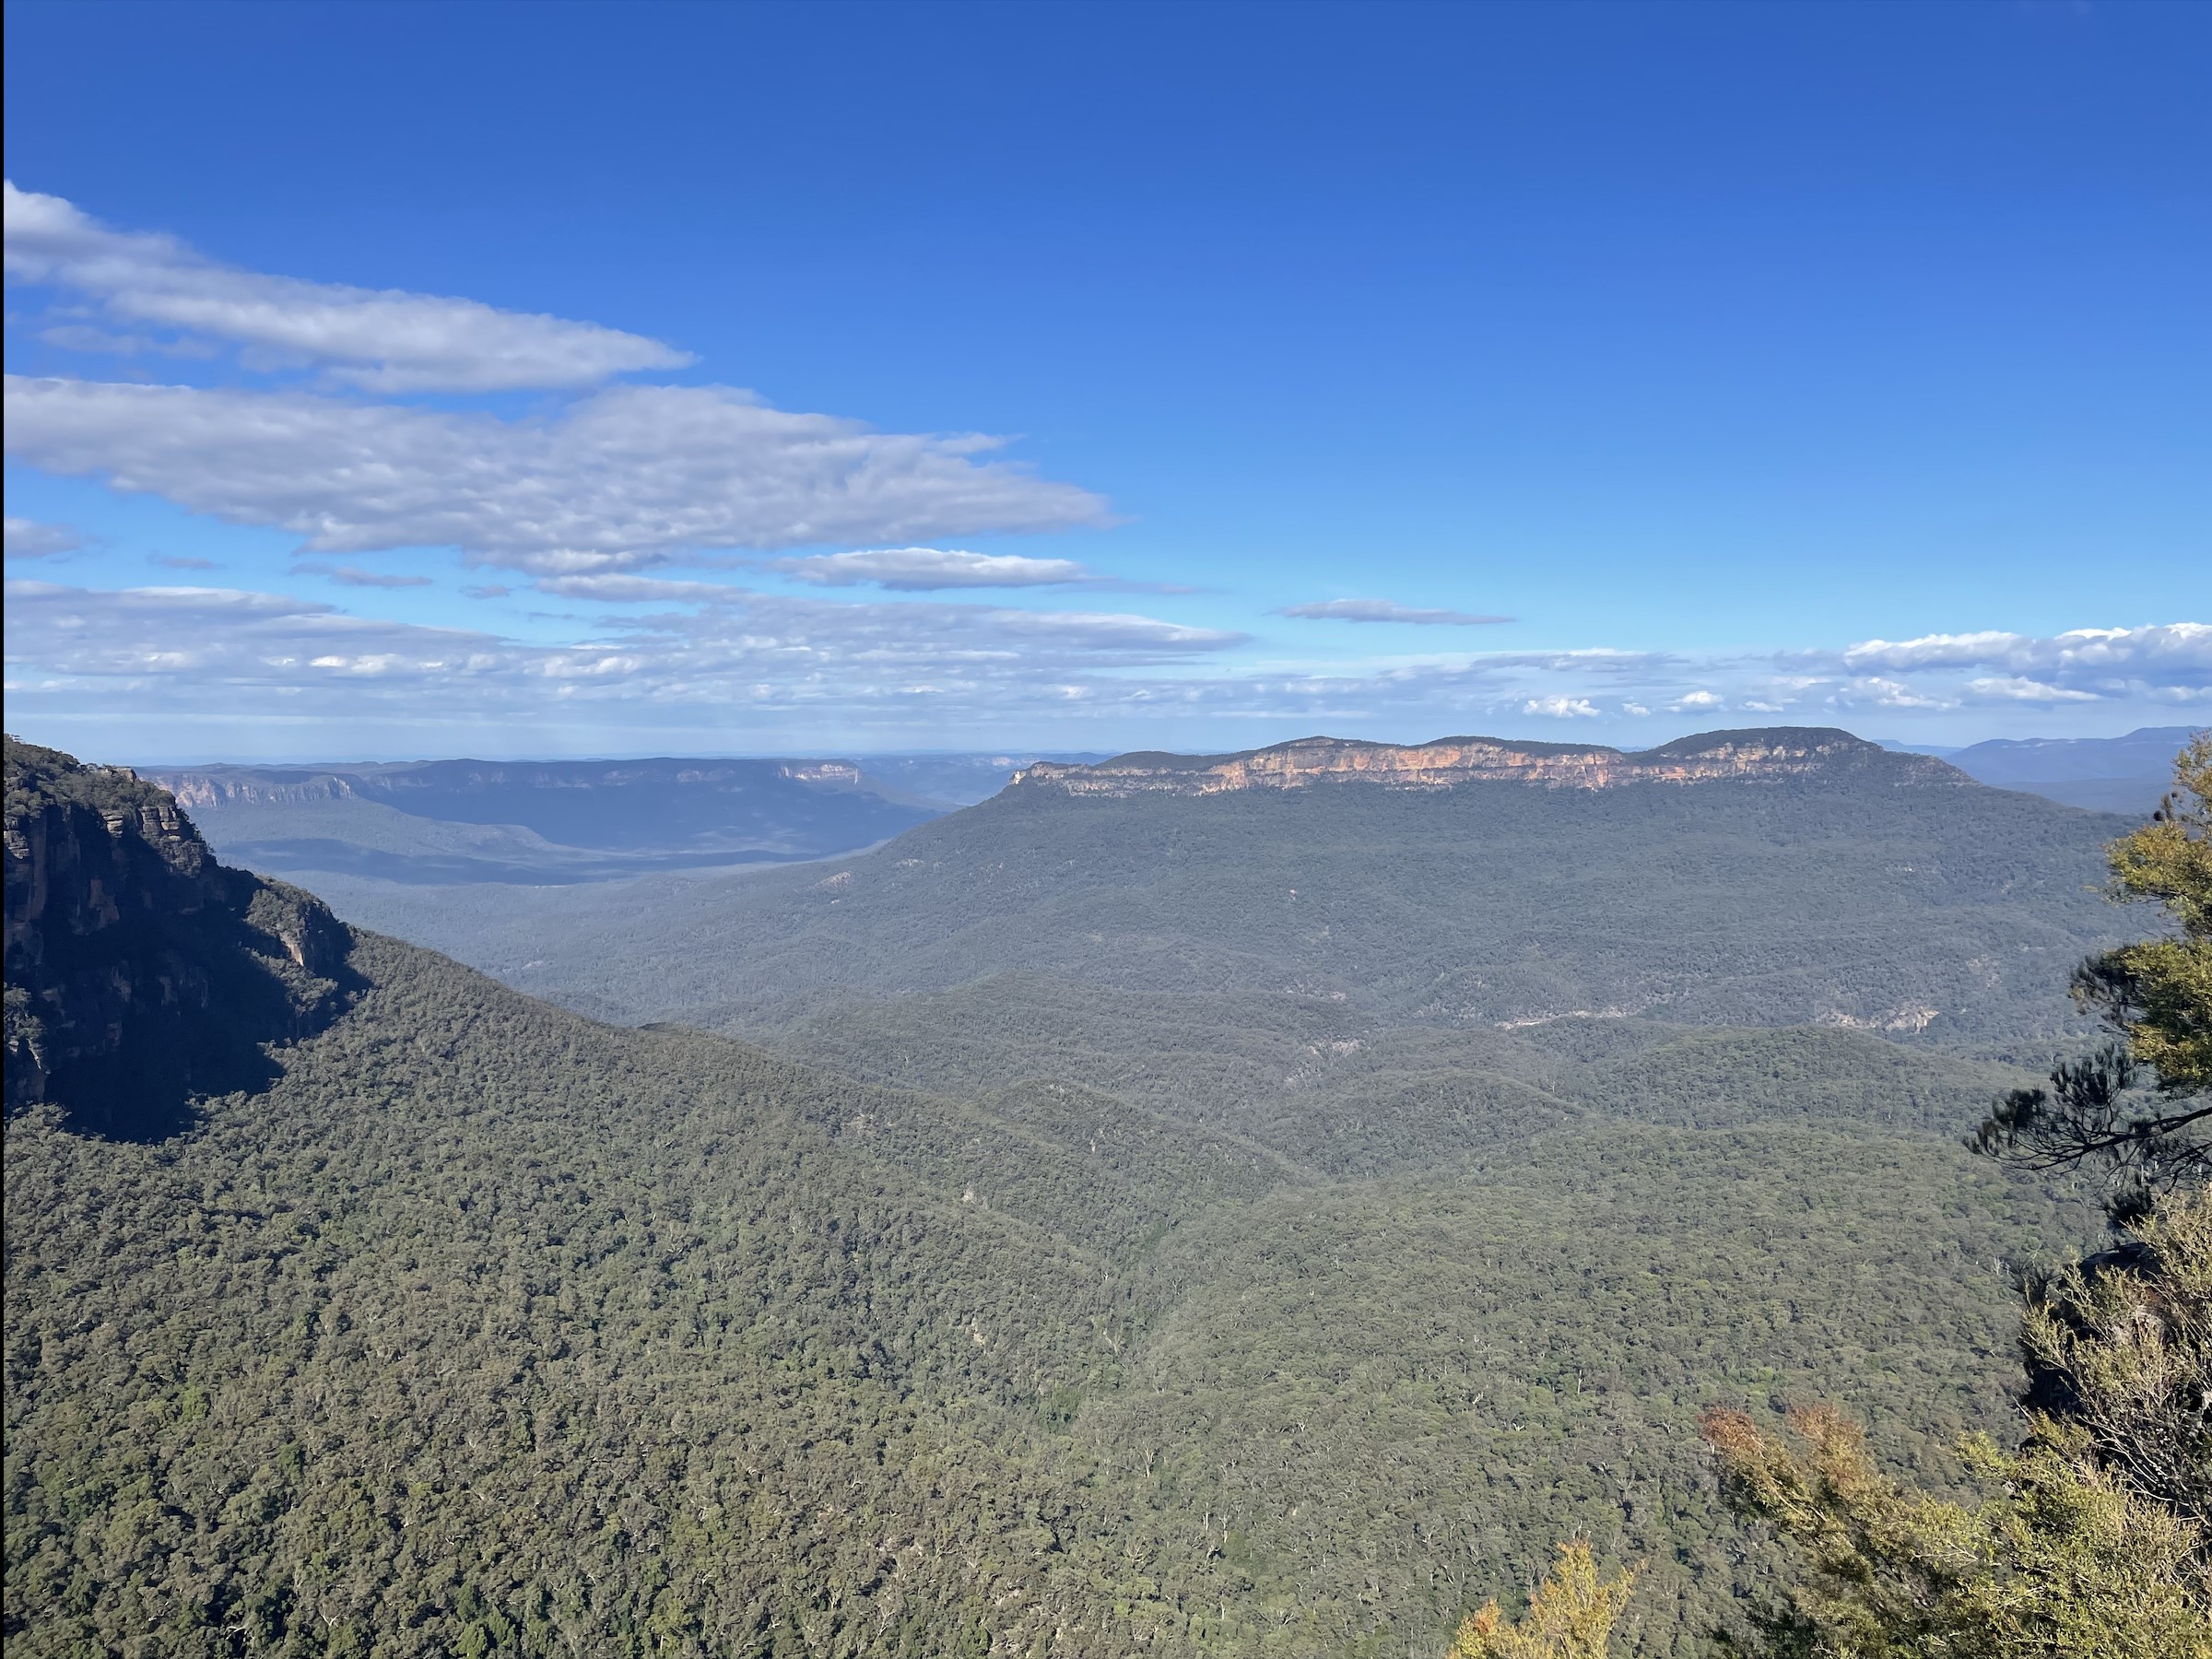 A view of Blue Mountains in Australia